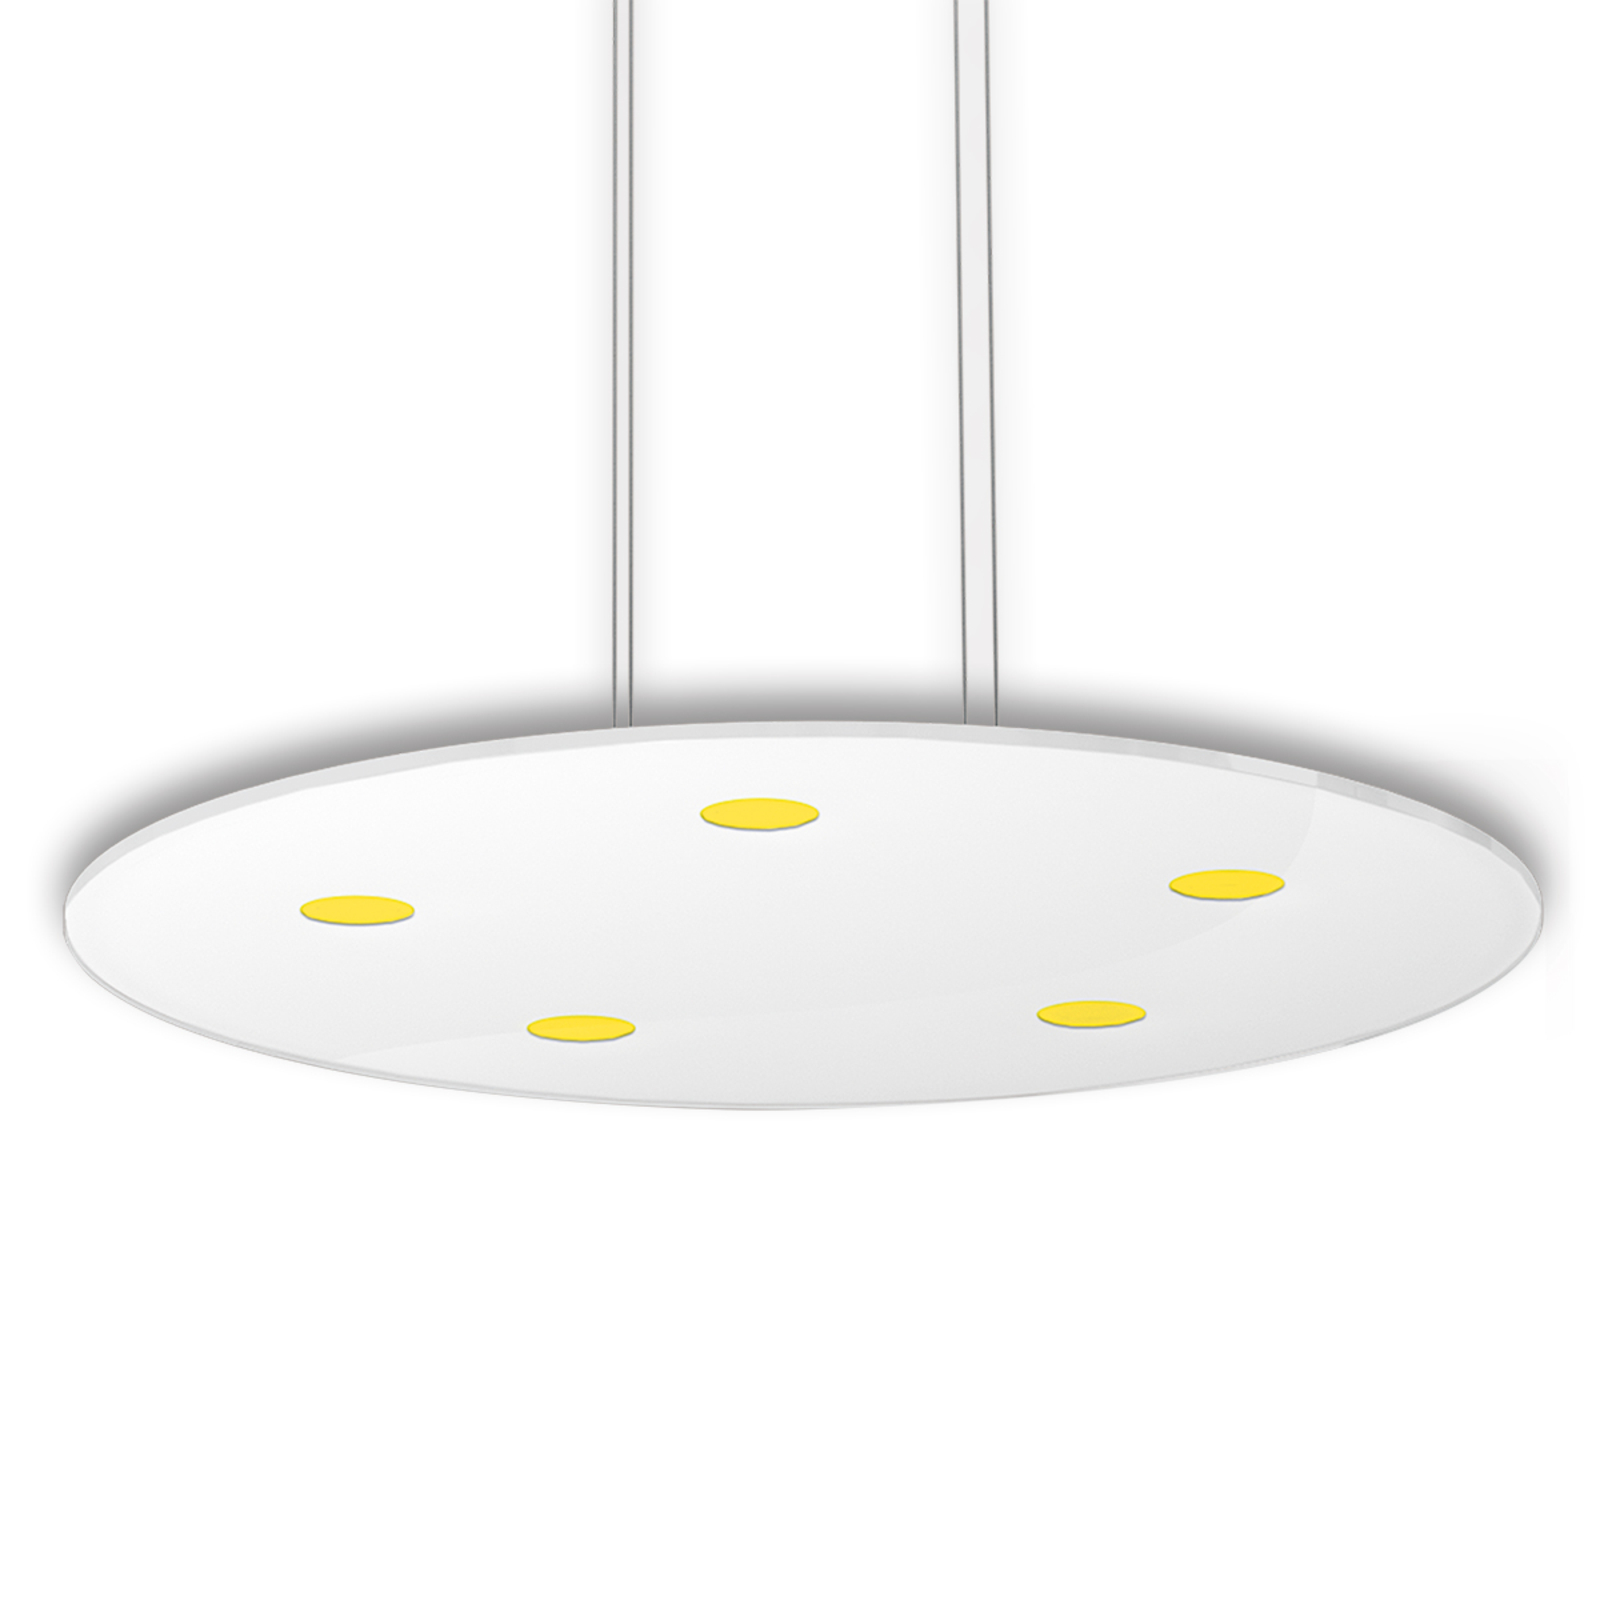 Round LED pendant light Sunia with touch dimmer